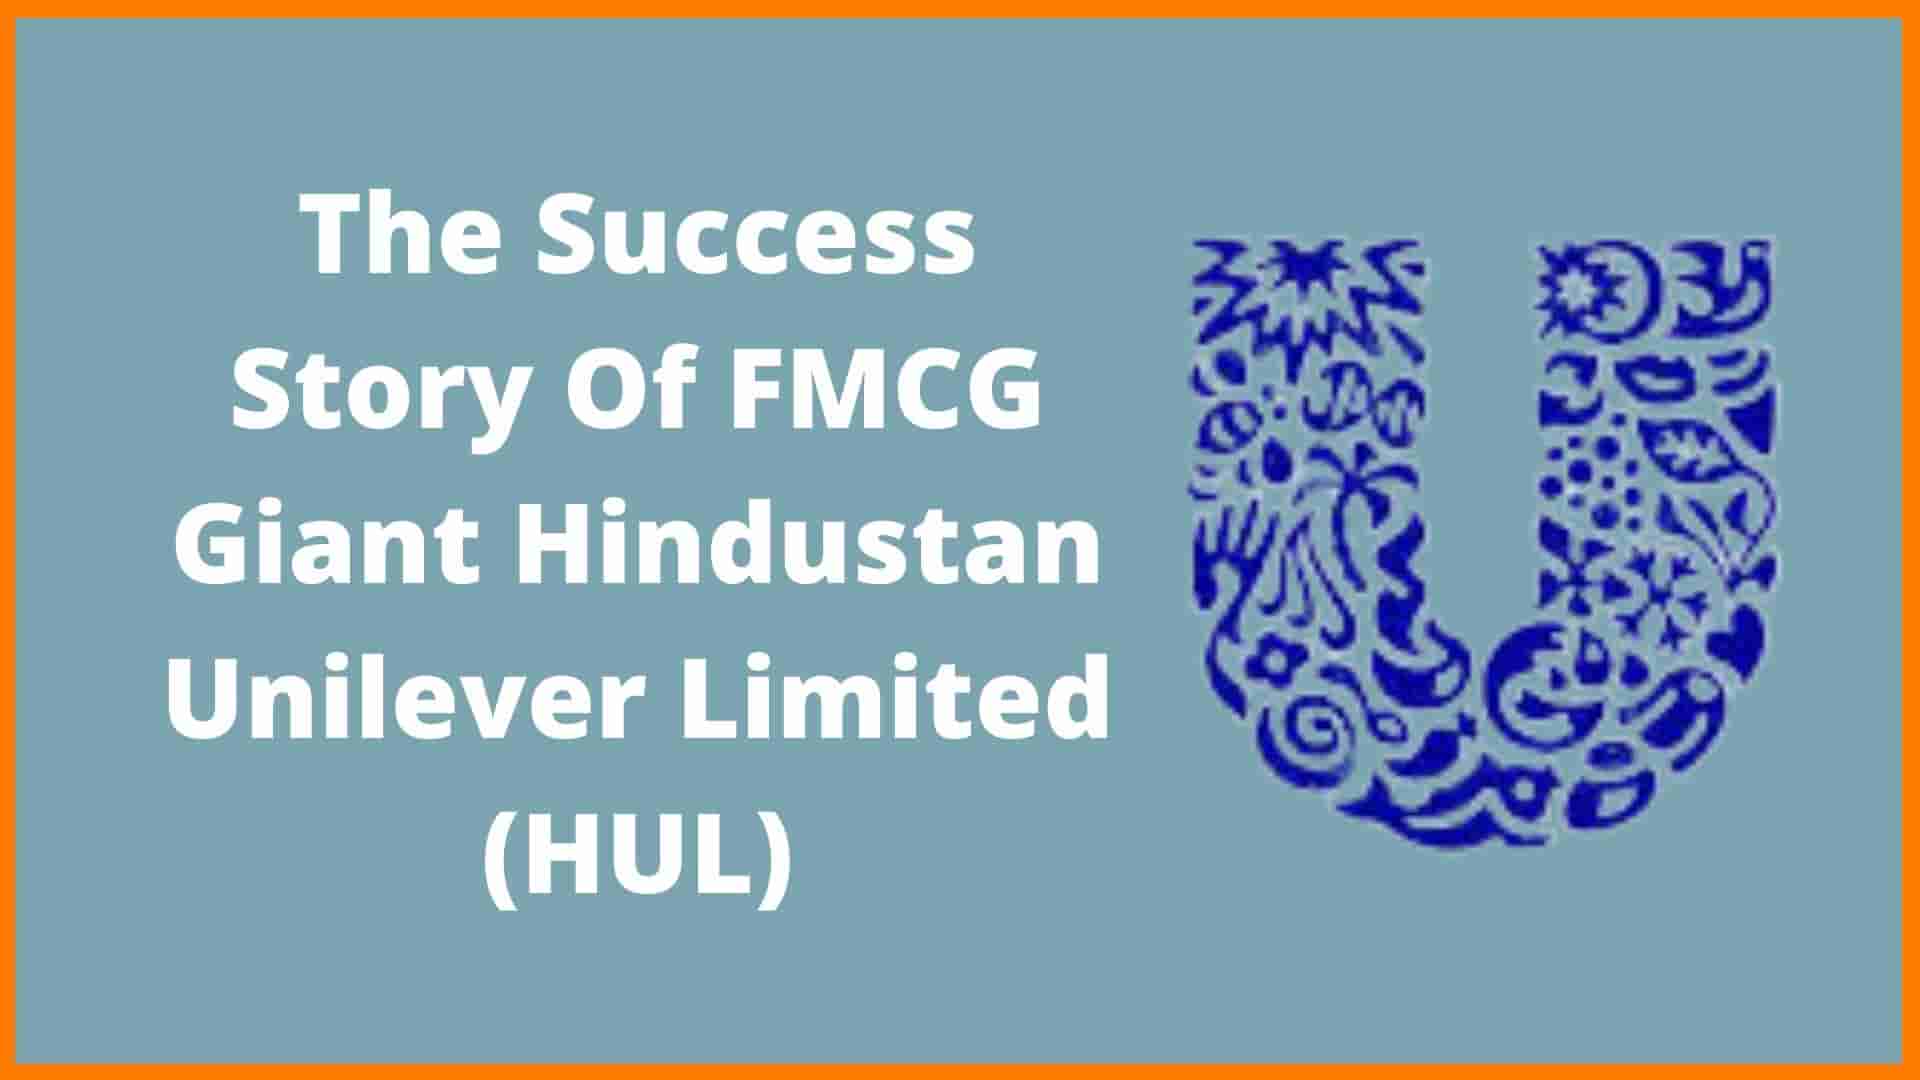 The Success Story Of FMCG Giant Hindustan Unilever Limited (HUL)